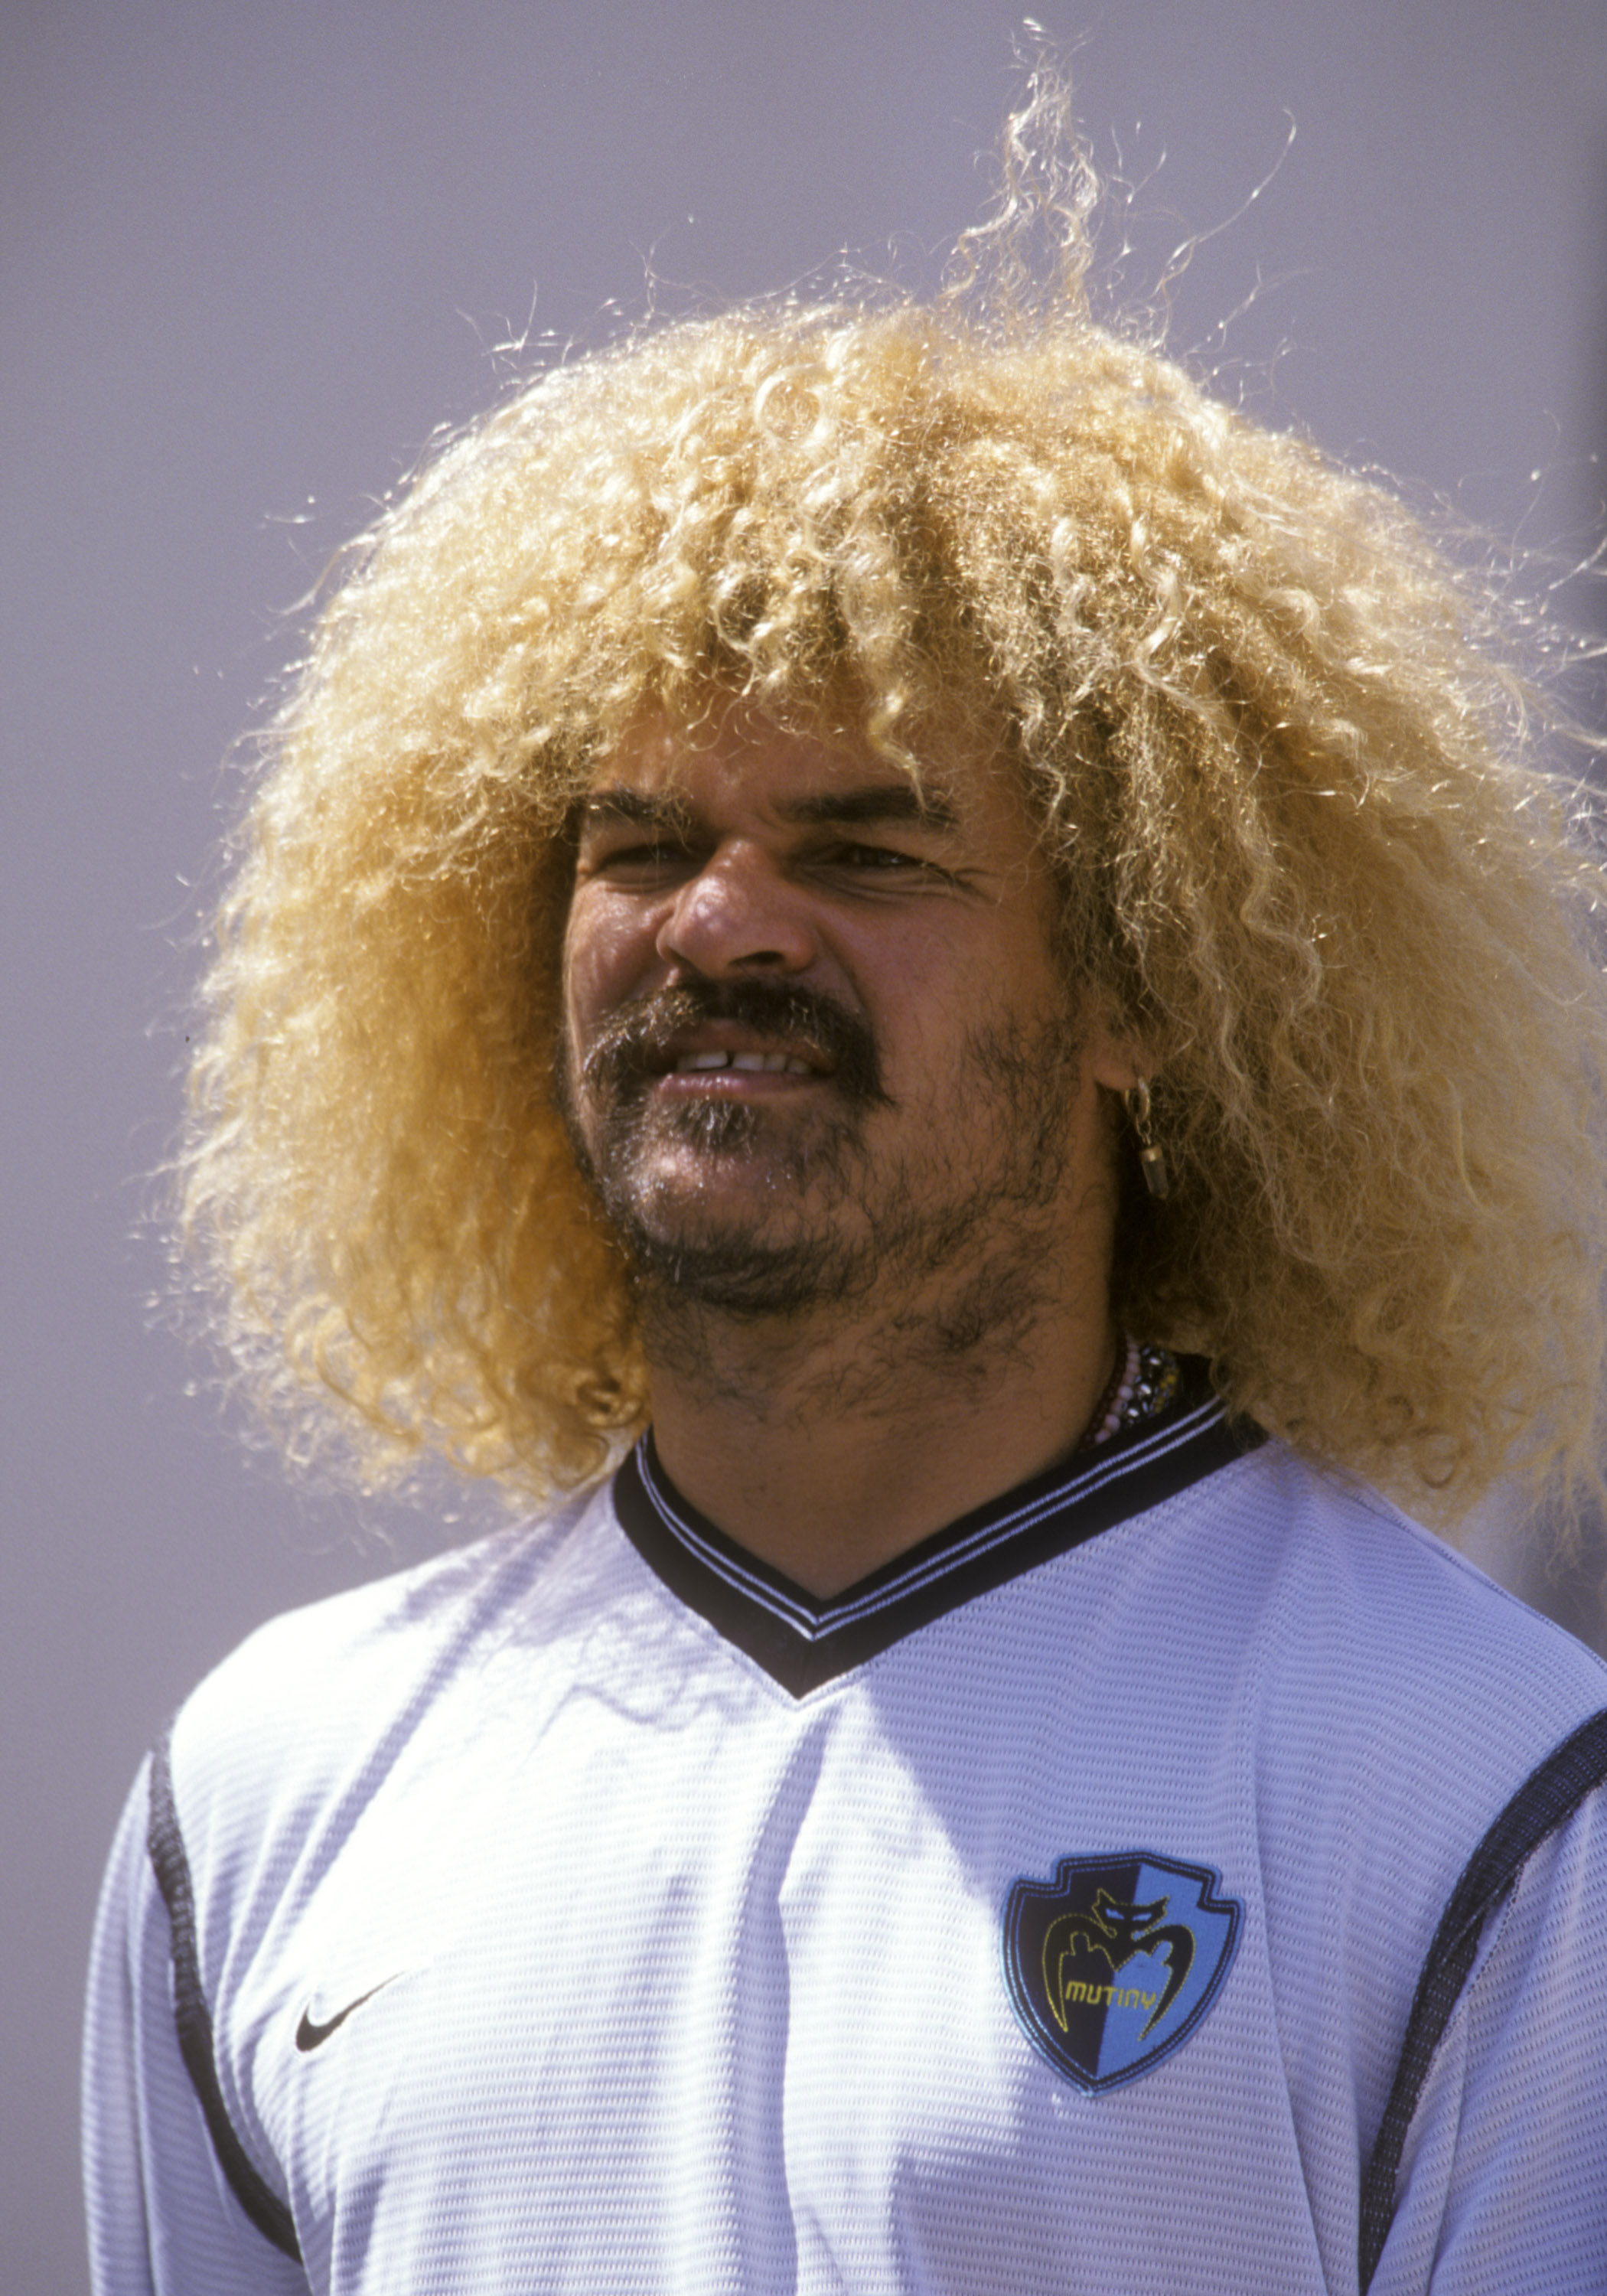 Soccer star Carlos Valderrama checks play during a soccer match in Tampa in June 2000. (Photo by Al Messerschmidt/WireImage)